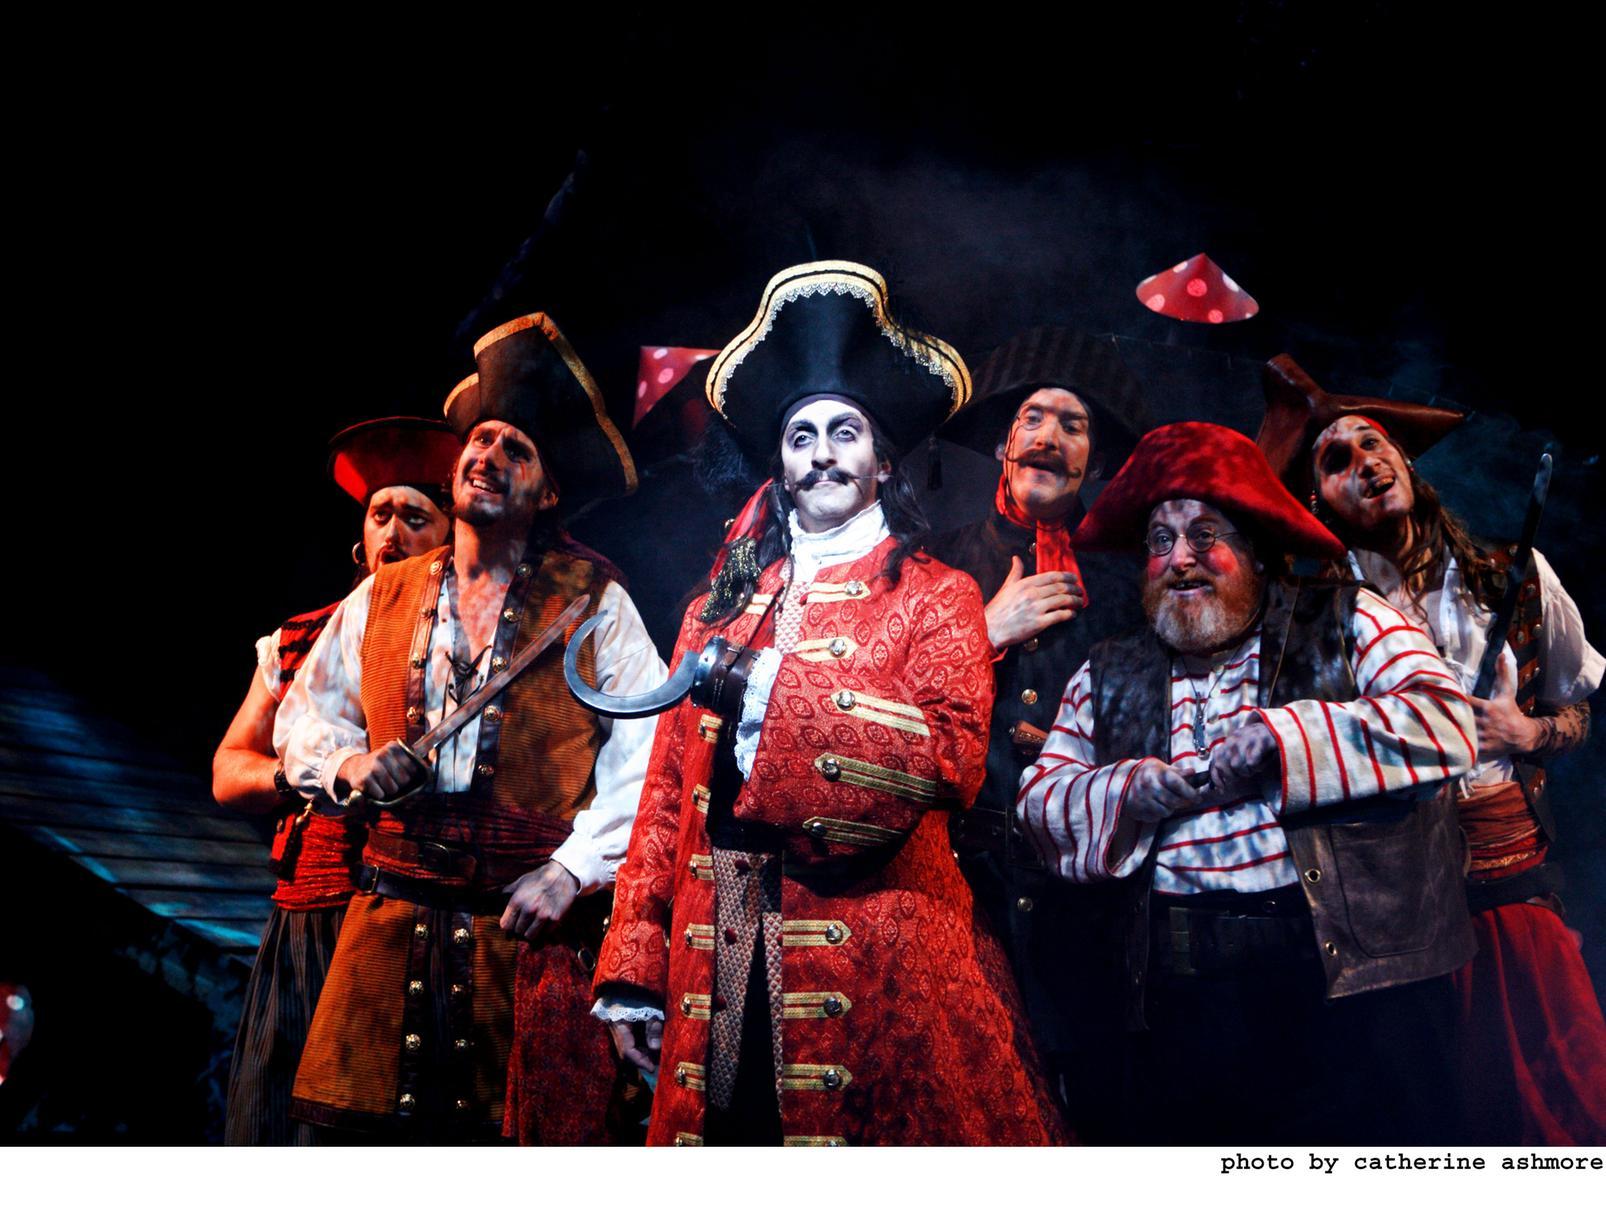 Audiences were thrilled by the swashbuckling adventure story of Peter Pan - the boy who never grew up.